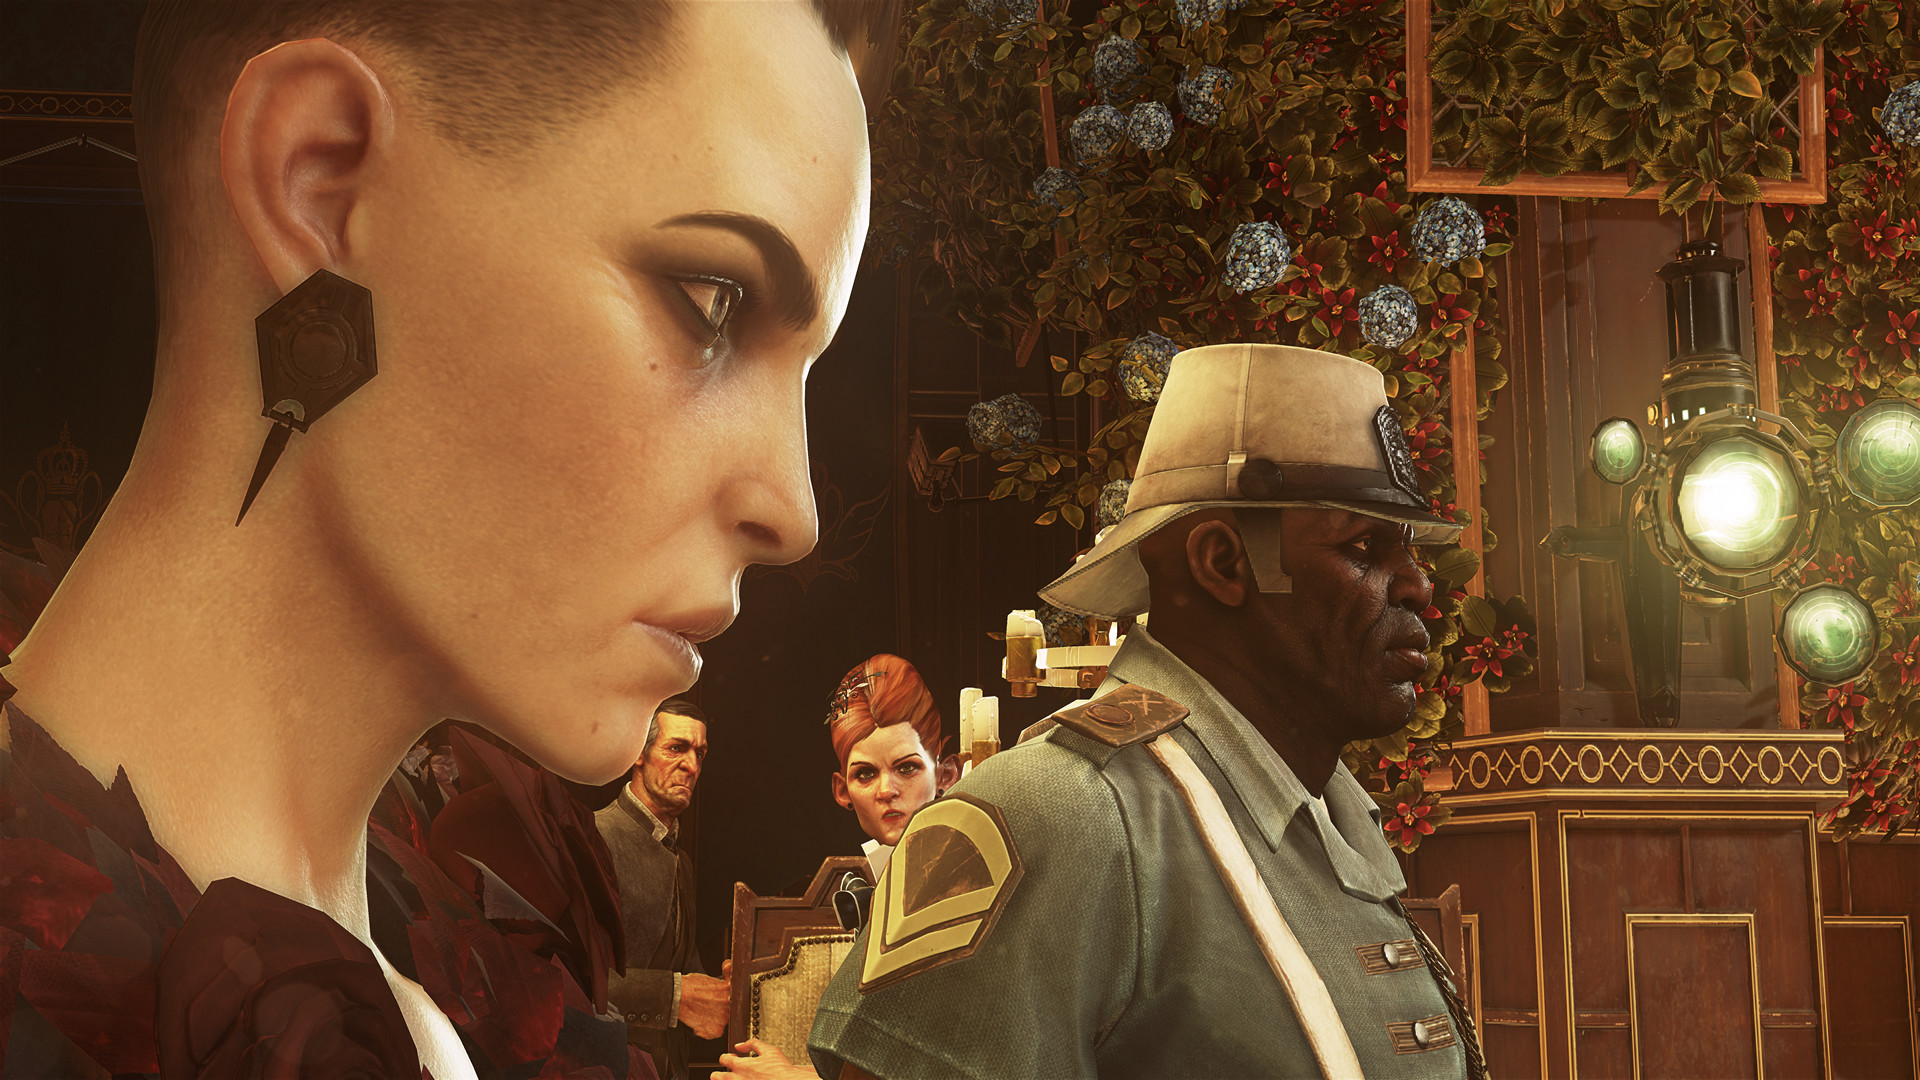  Dishonored 2 Torrent 